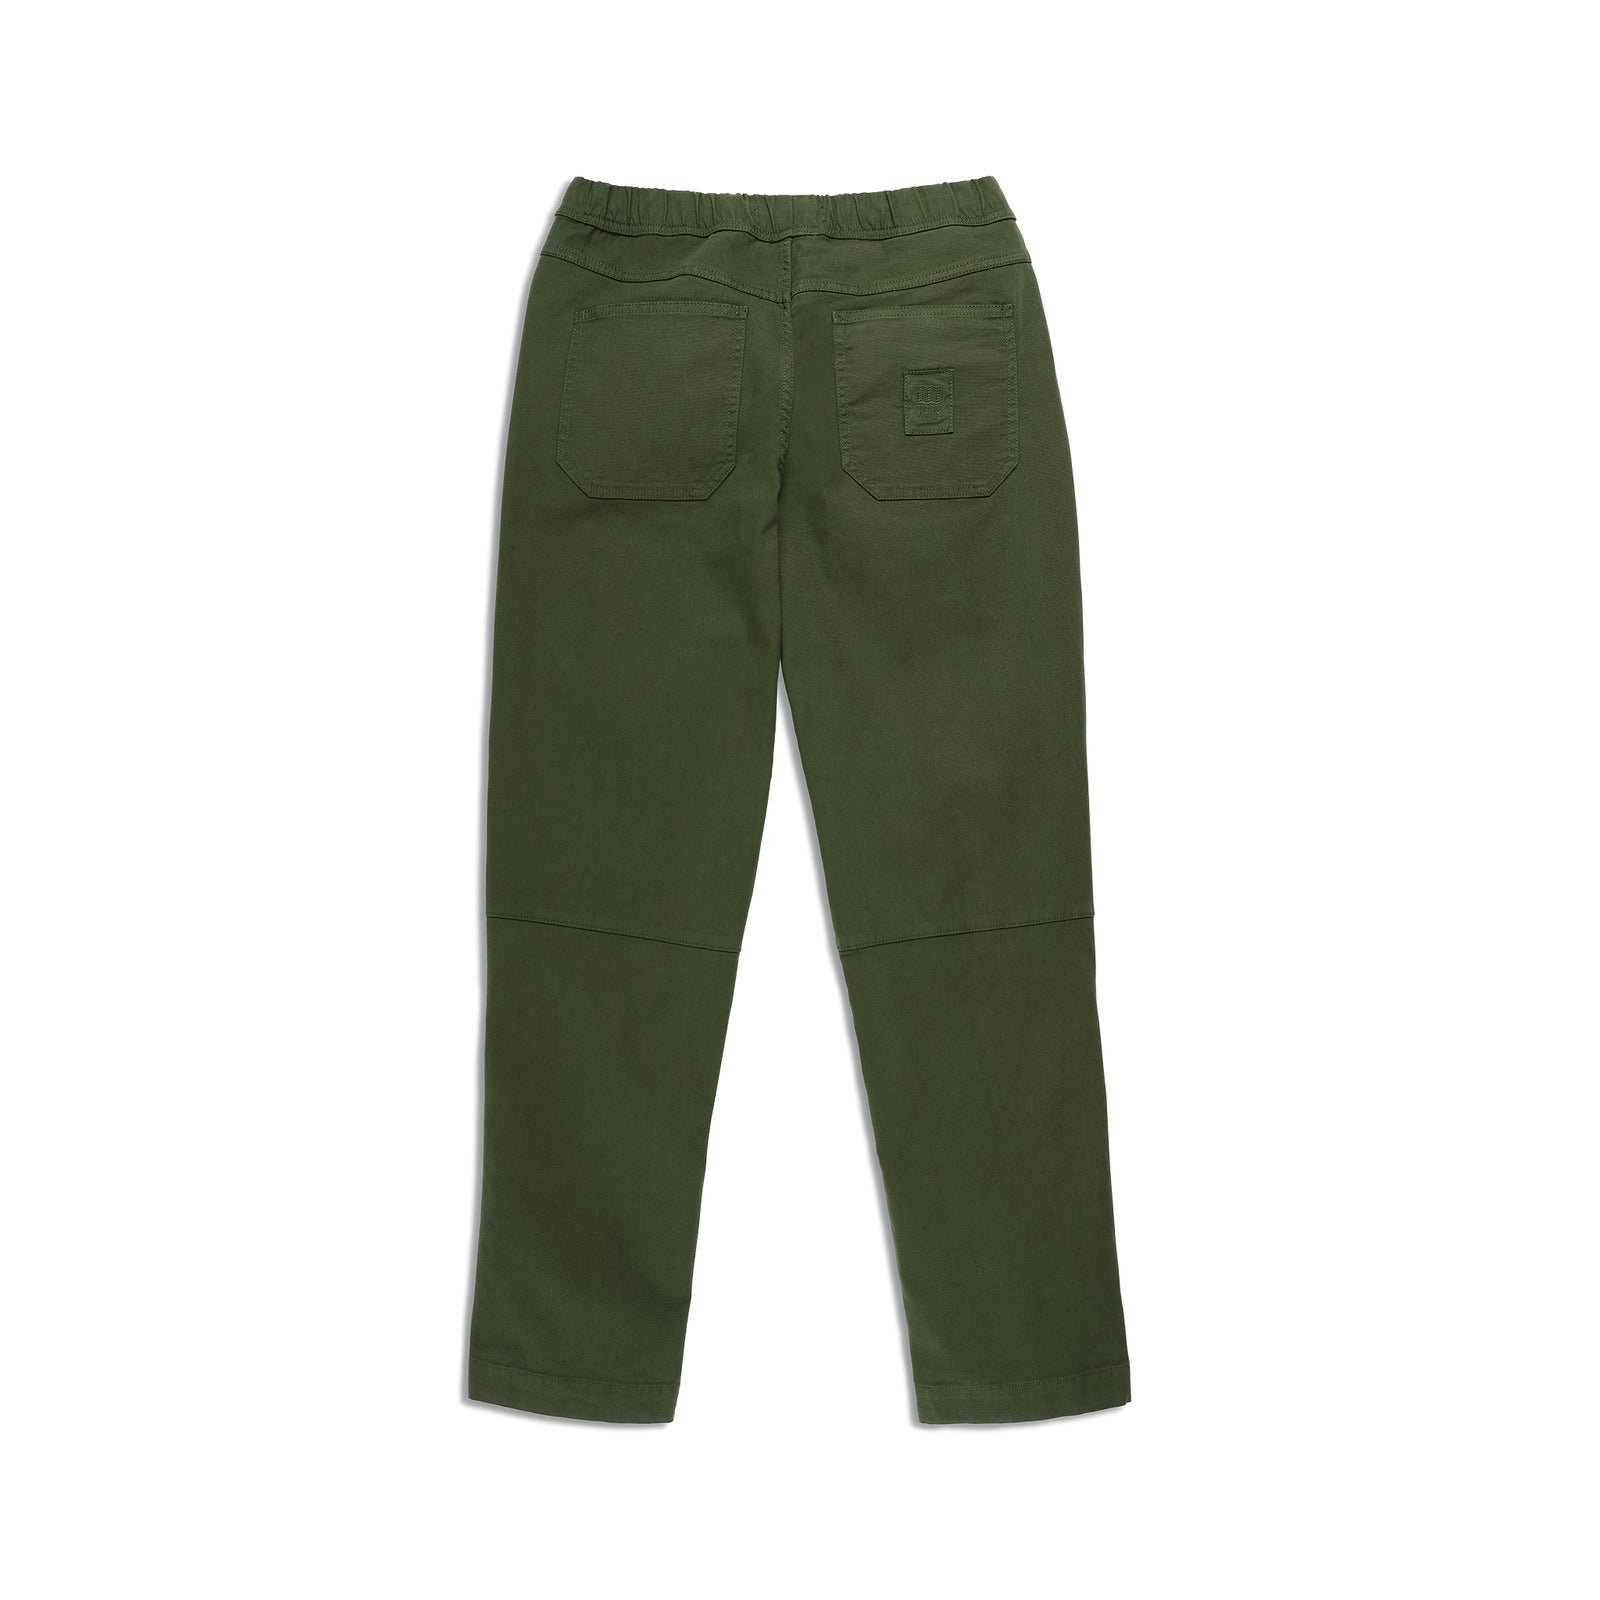 Back View of Topo Designs Dirt Pants Classic - Women's in "Olive"